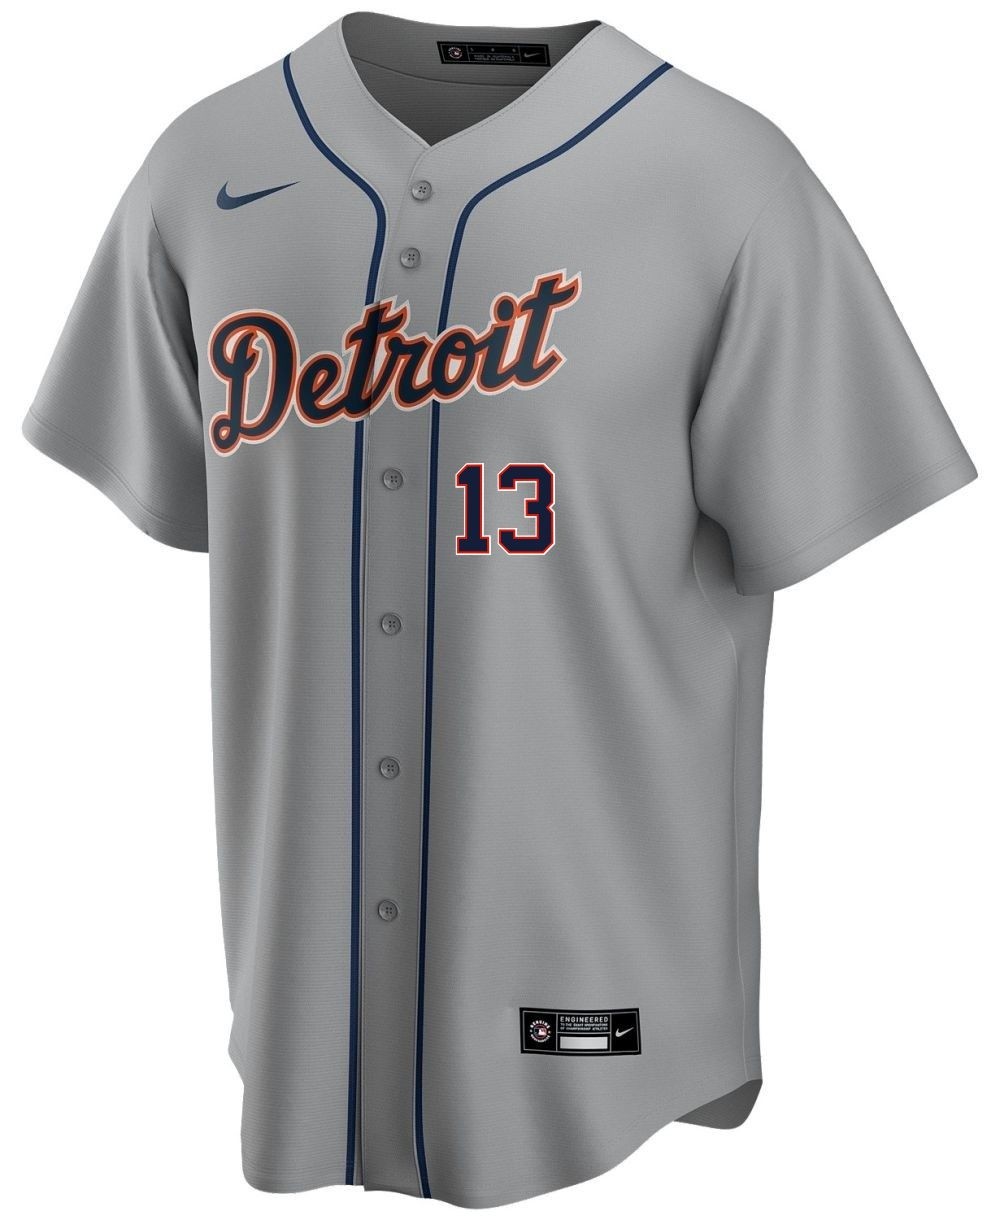 Detroit Tigers Nike Haase Home Jersey